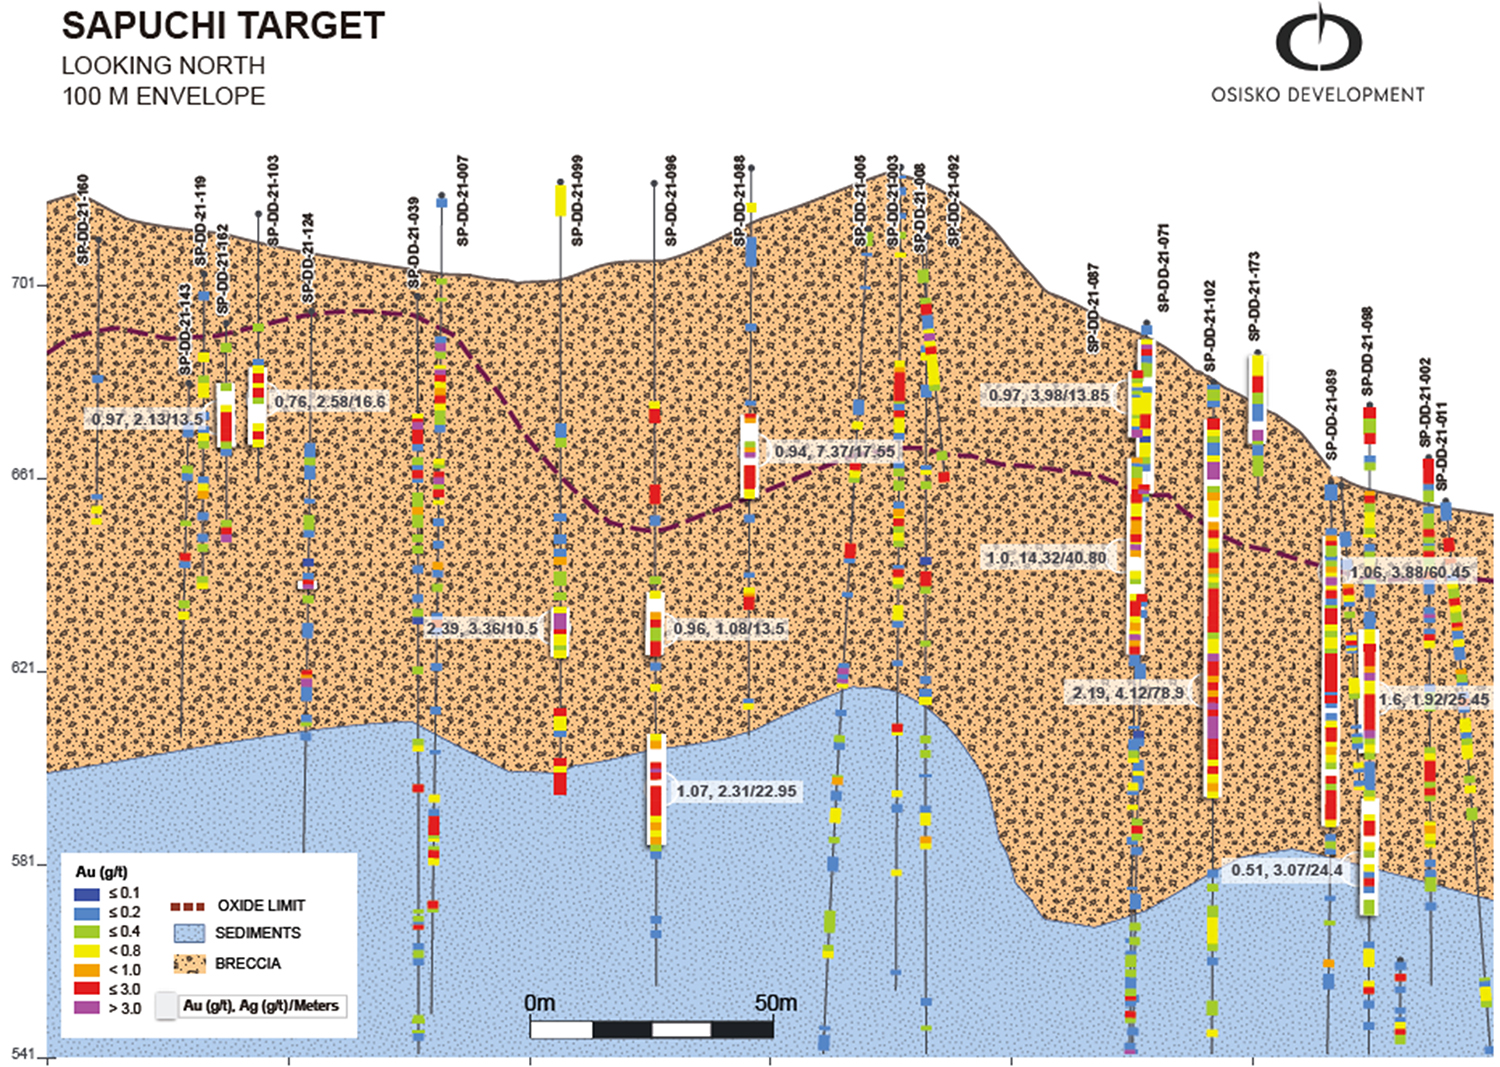 Figure 5: Sapuchi section select drilling highlights